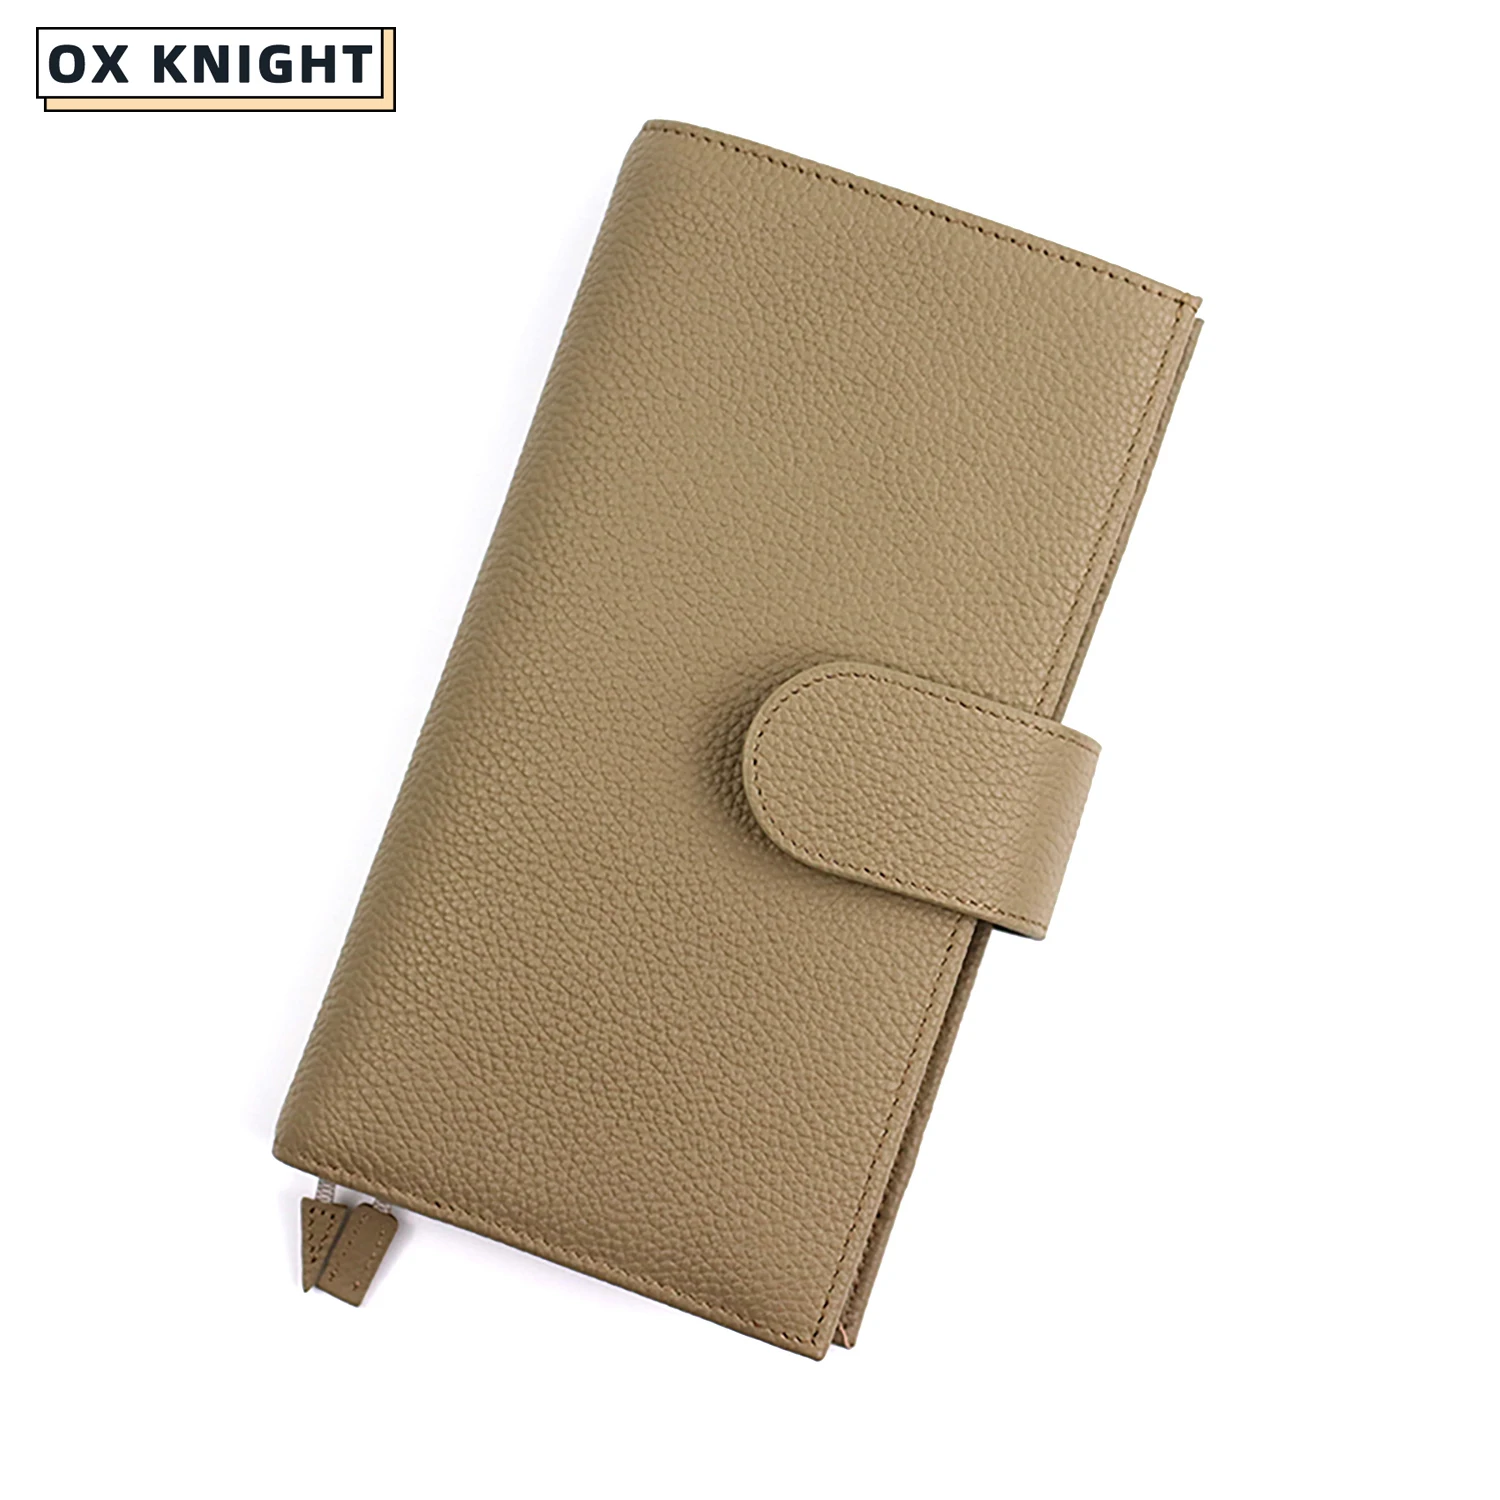 OX KNIGHT Companion Travel Journal Sketchbook Pebbled Grain Leather A5 Notebook Planner Organizer Education Office Supplies